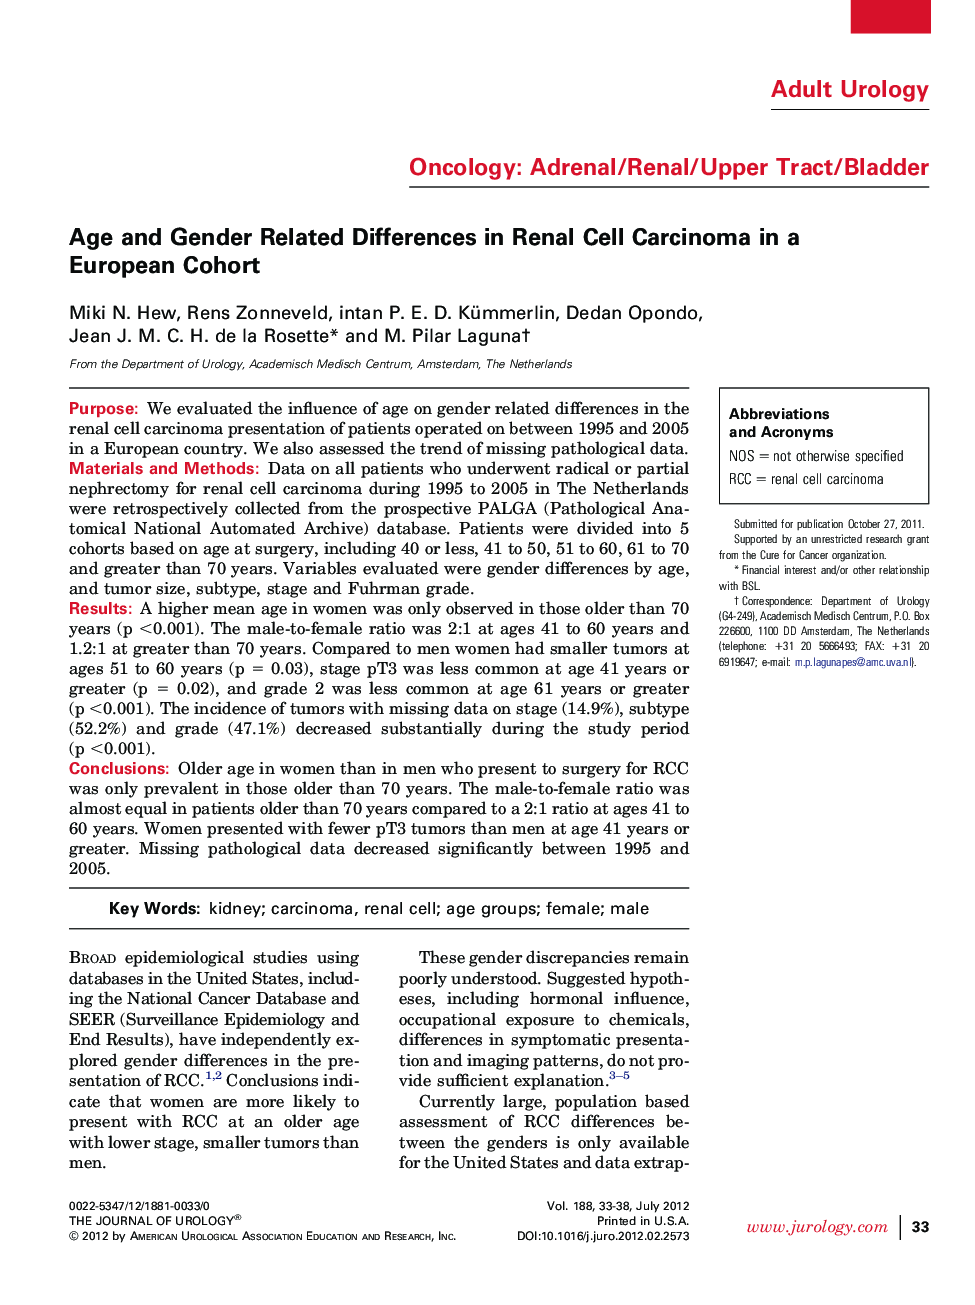 Age and Gender Related Differences in Renal Cell Carcinoma in a European Cohort 